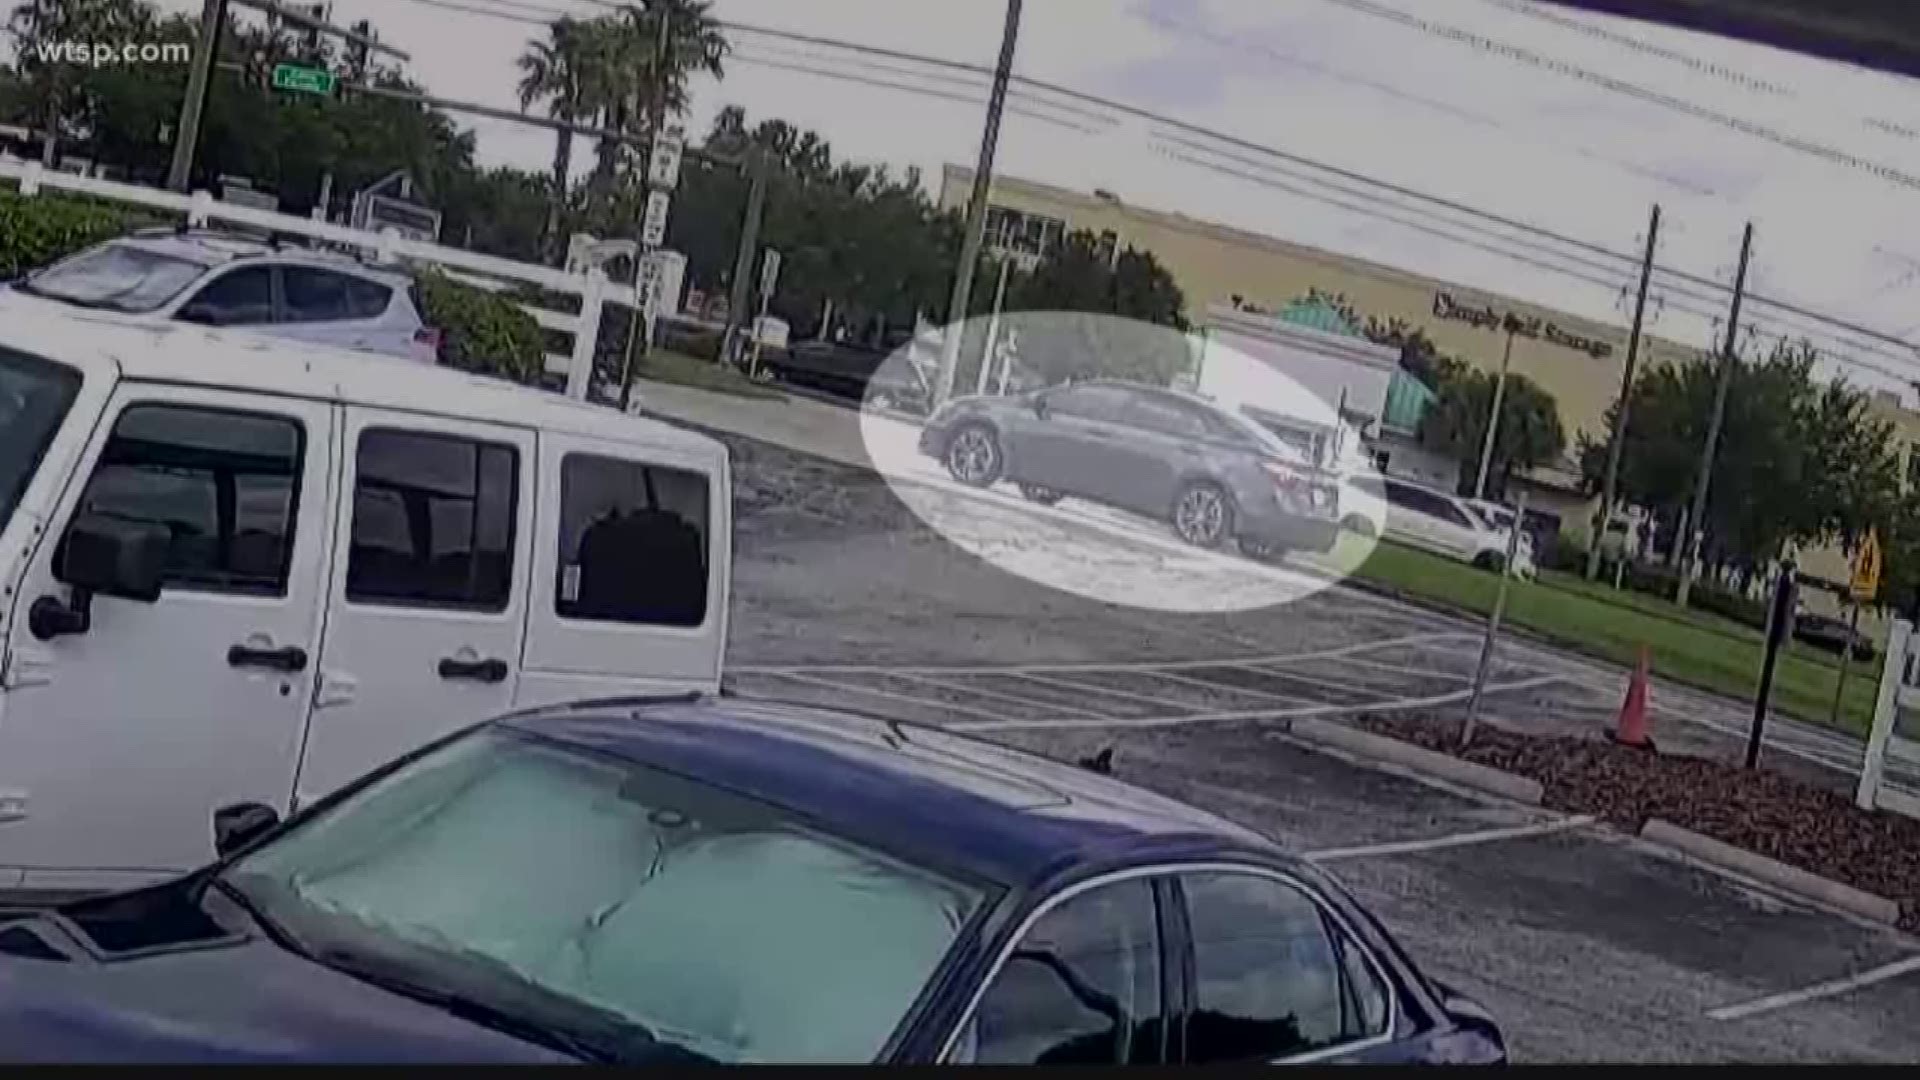 The Pasco County Sheriff's Office is looking for a driver its deputies say tried to lure a girl into his car Monday morning outside a Land O' Lakes school.

The incident happened about 10:15 a.m. in the parking lot of Academy at the Lakes on Collier Parkway. Deputies say the girl, a high school junior, was walking toward the school when a man rolled down the window of a Toyota Corolla, waved the girl over and told her, "Come over here, get in the car."